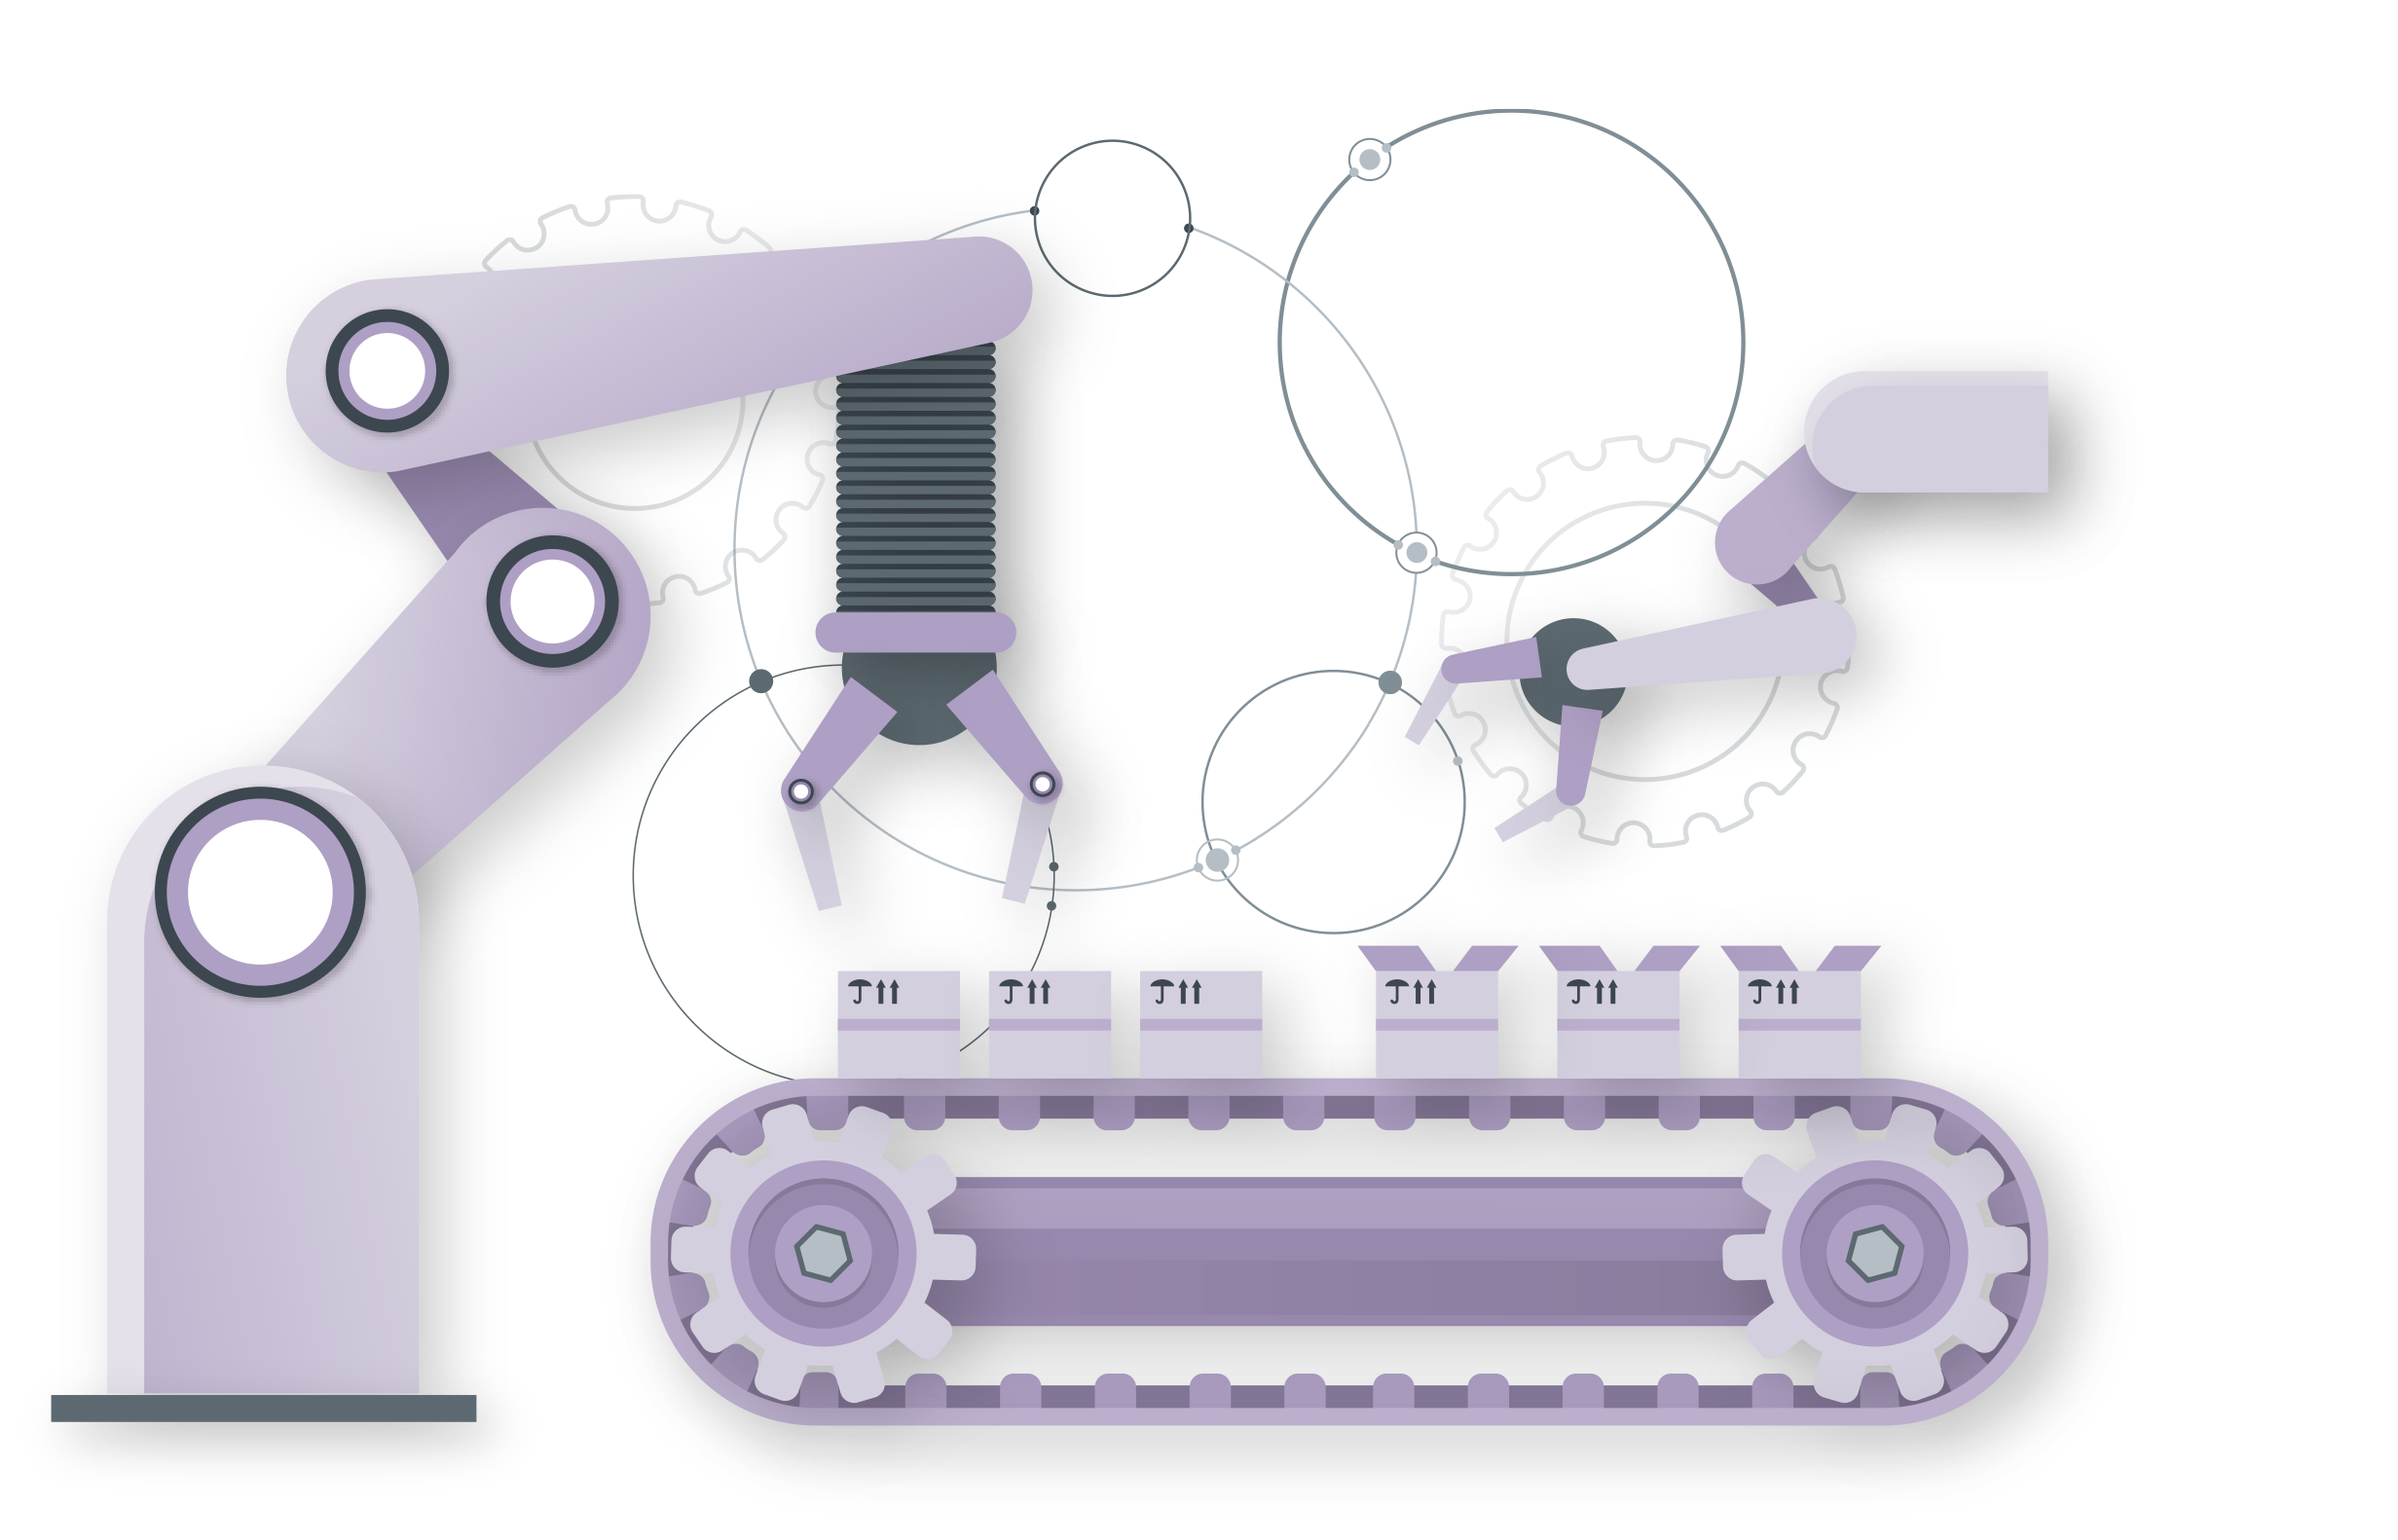 Industrial and Manufacturing Icon showing a robotic arm over a conveyor belt